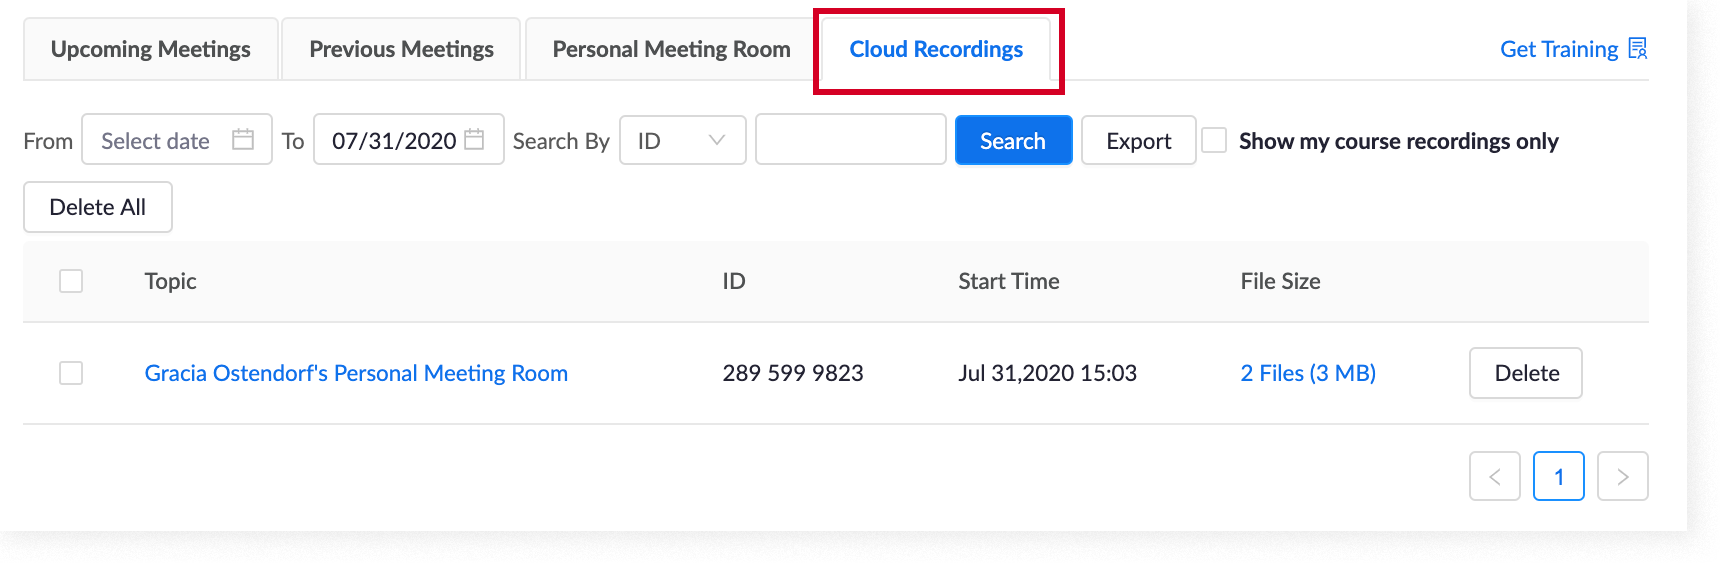 List of meetings with cloud recordings saved in Canvas